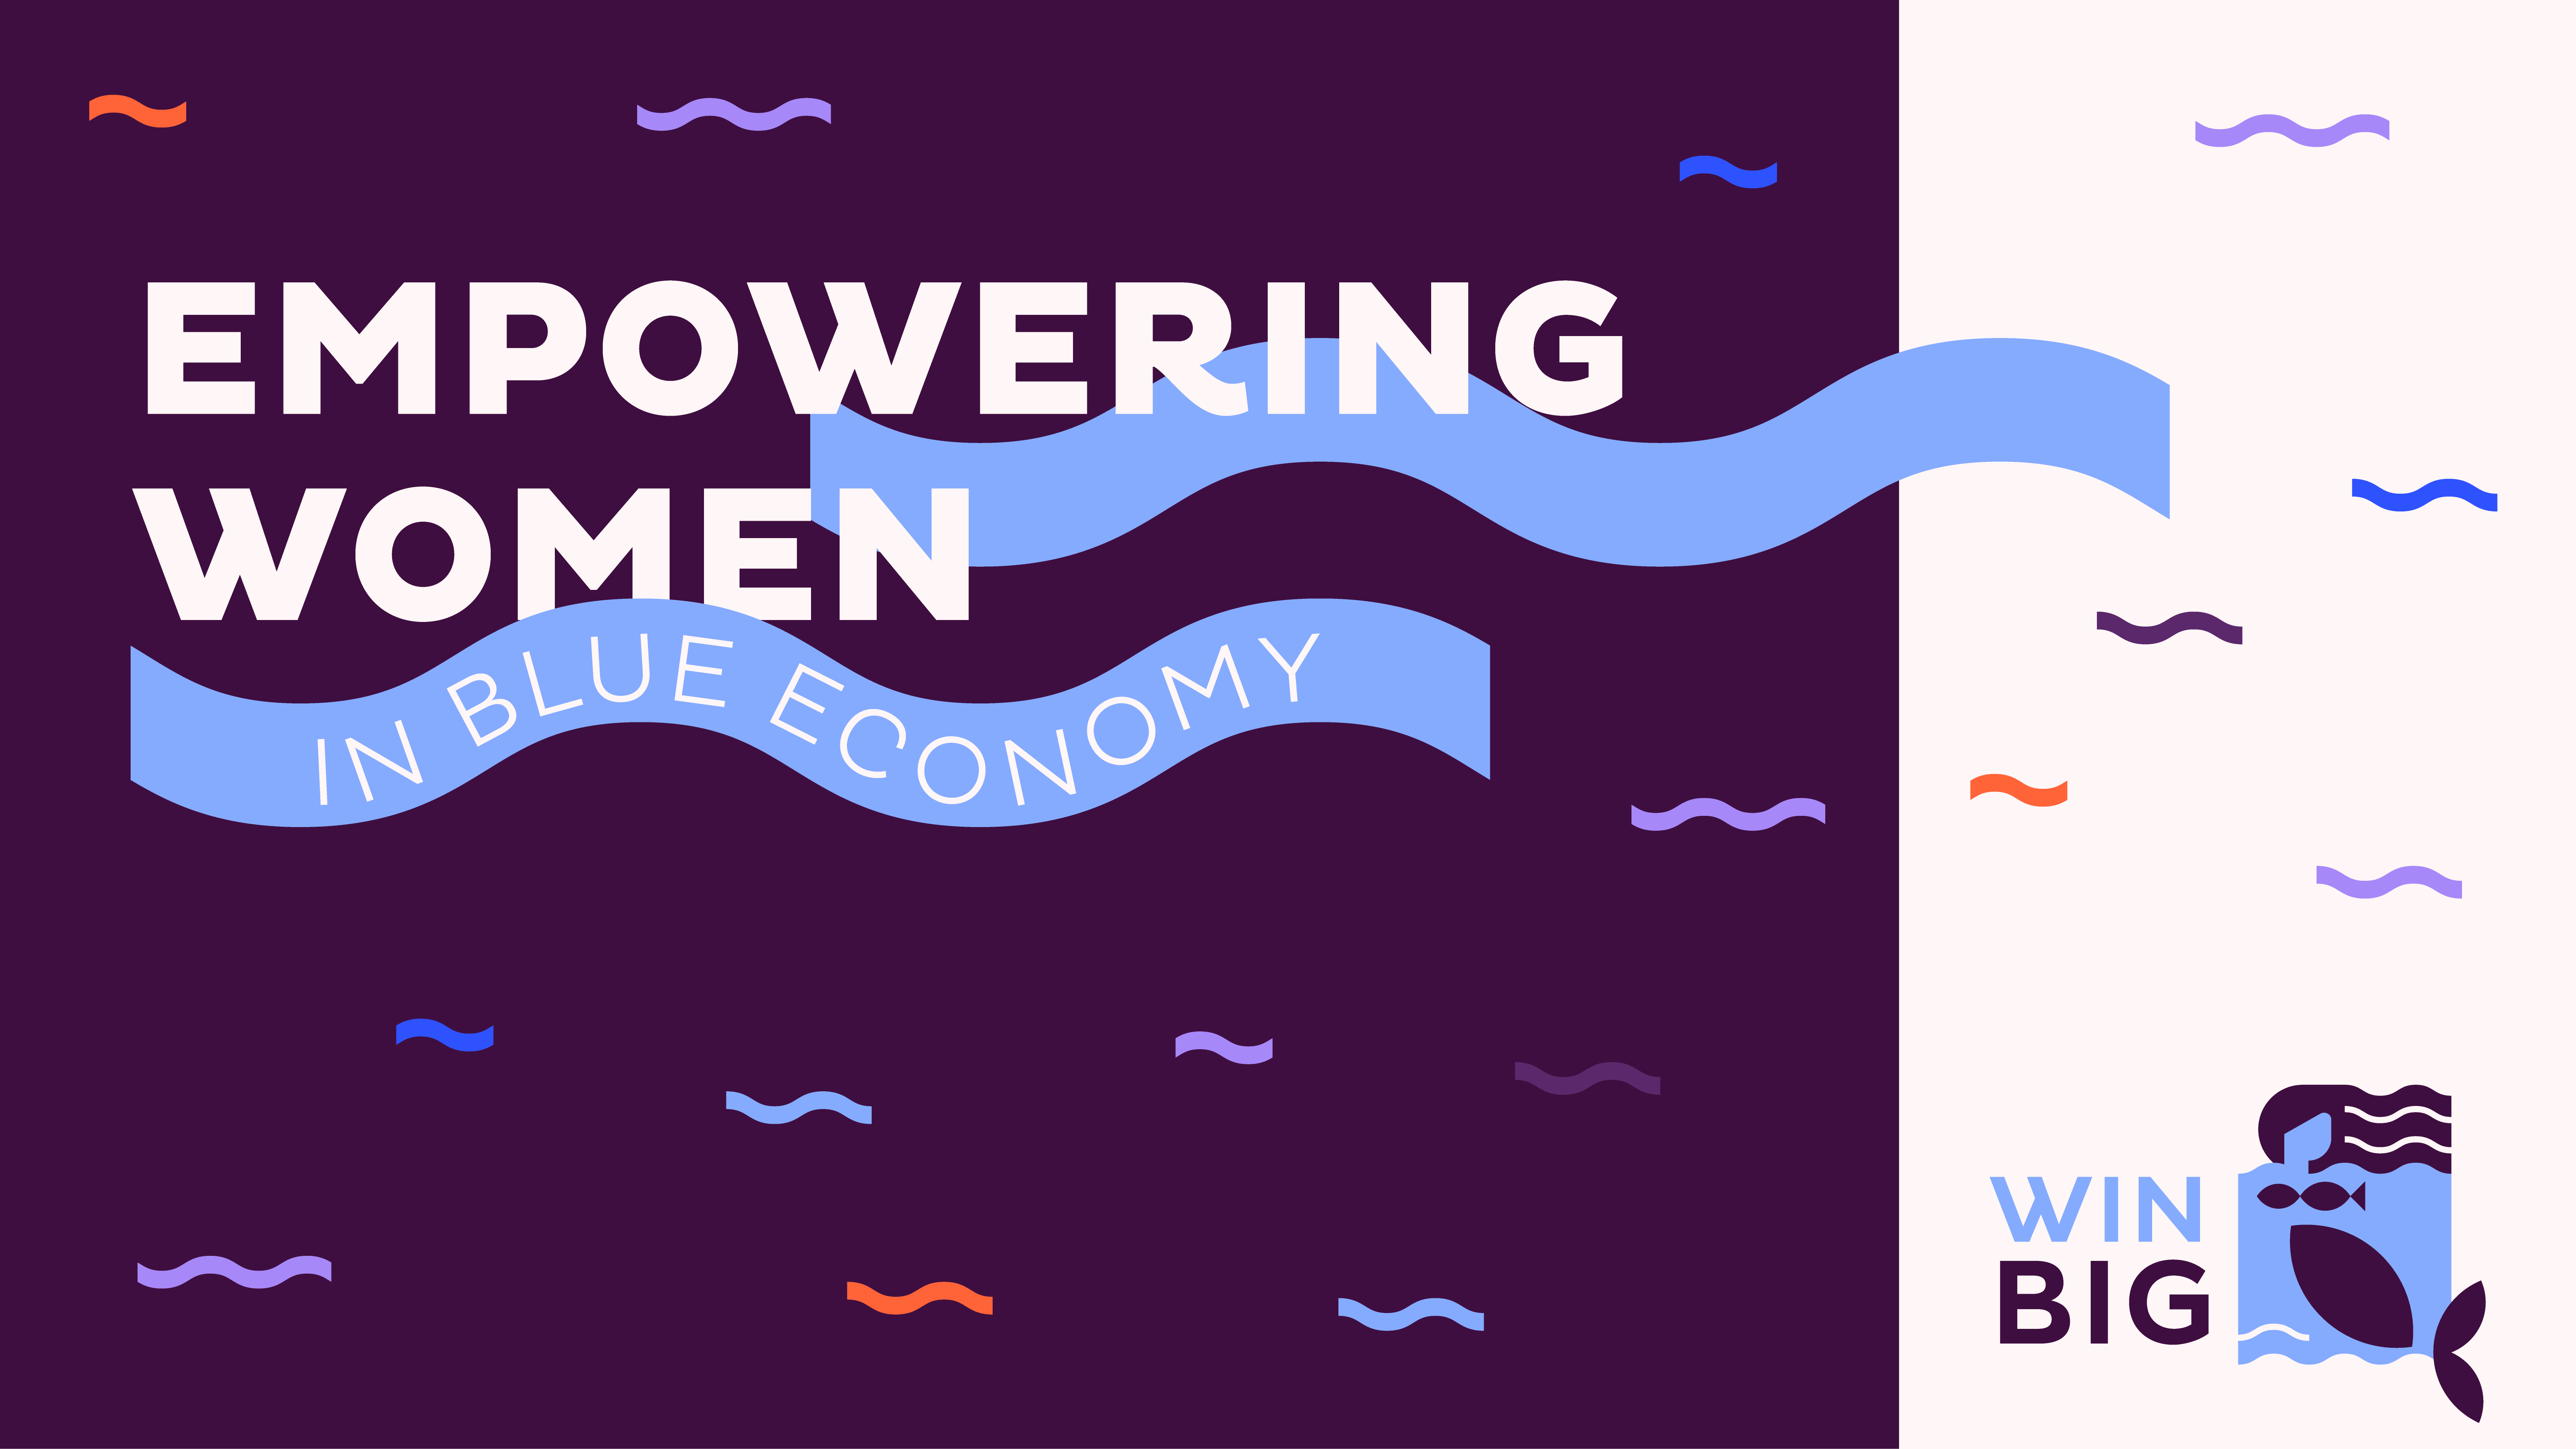 Promoting gender equality in the Blue Economy through data gathering and capacity building 